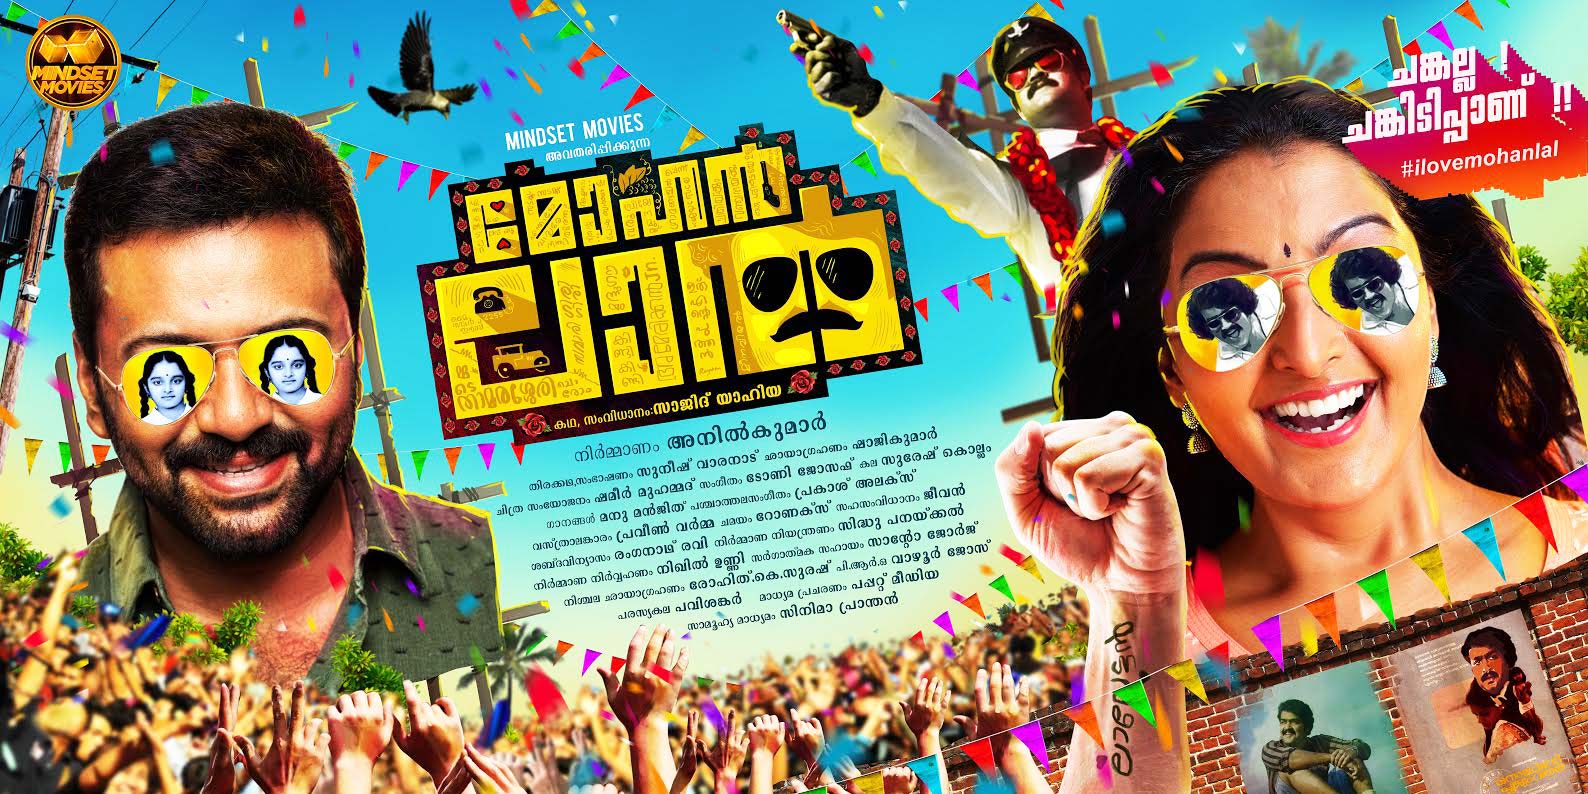 Malayalam Mohanlal 2nd Day box office collection Total 3rd Day Worldwide Earning